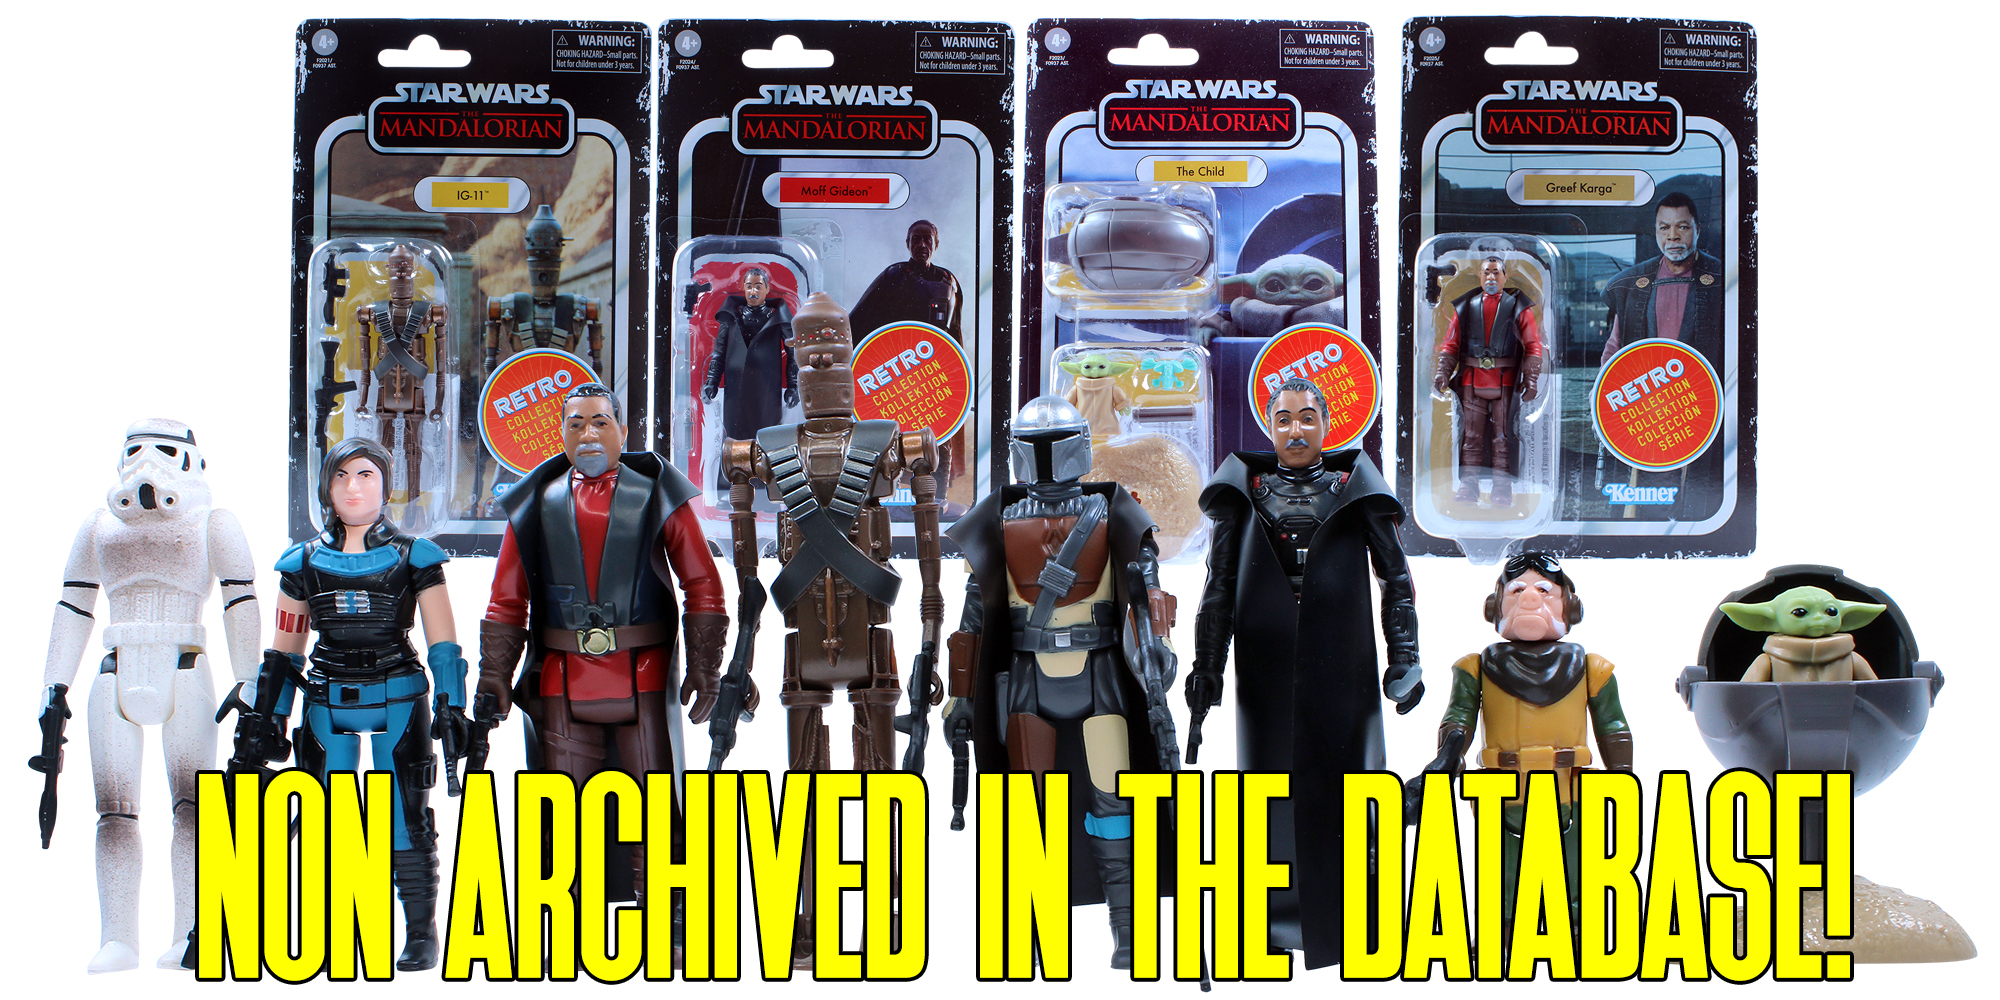 All Retro Collection Mandalorian Figures Now Archived